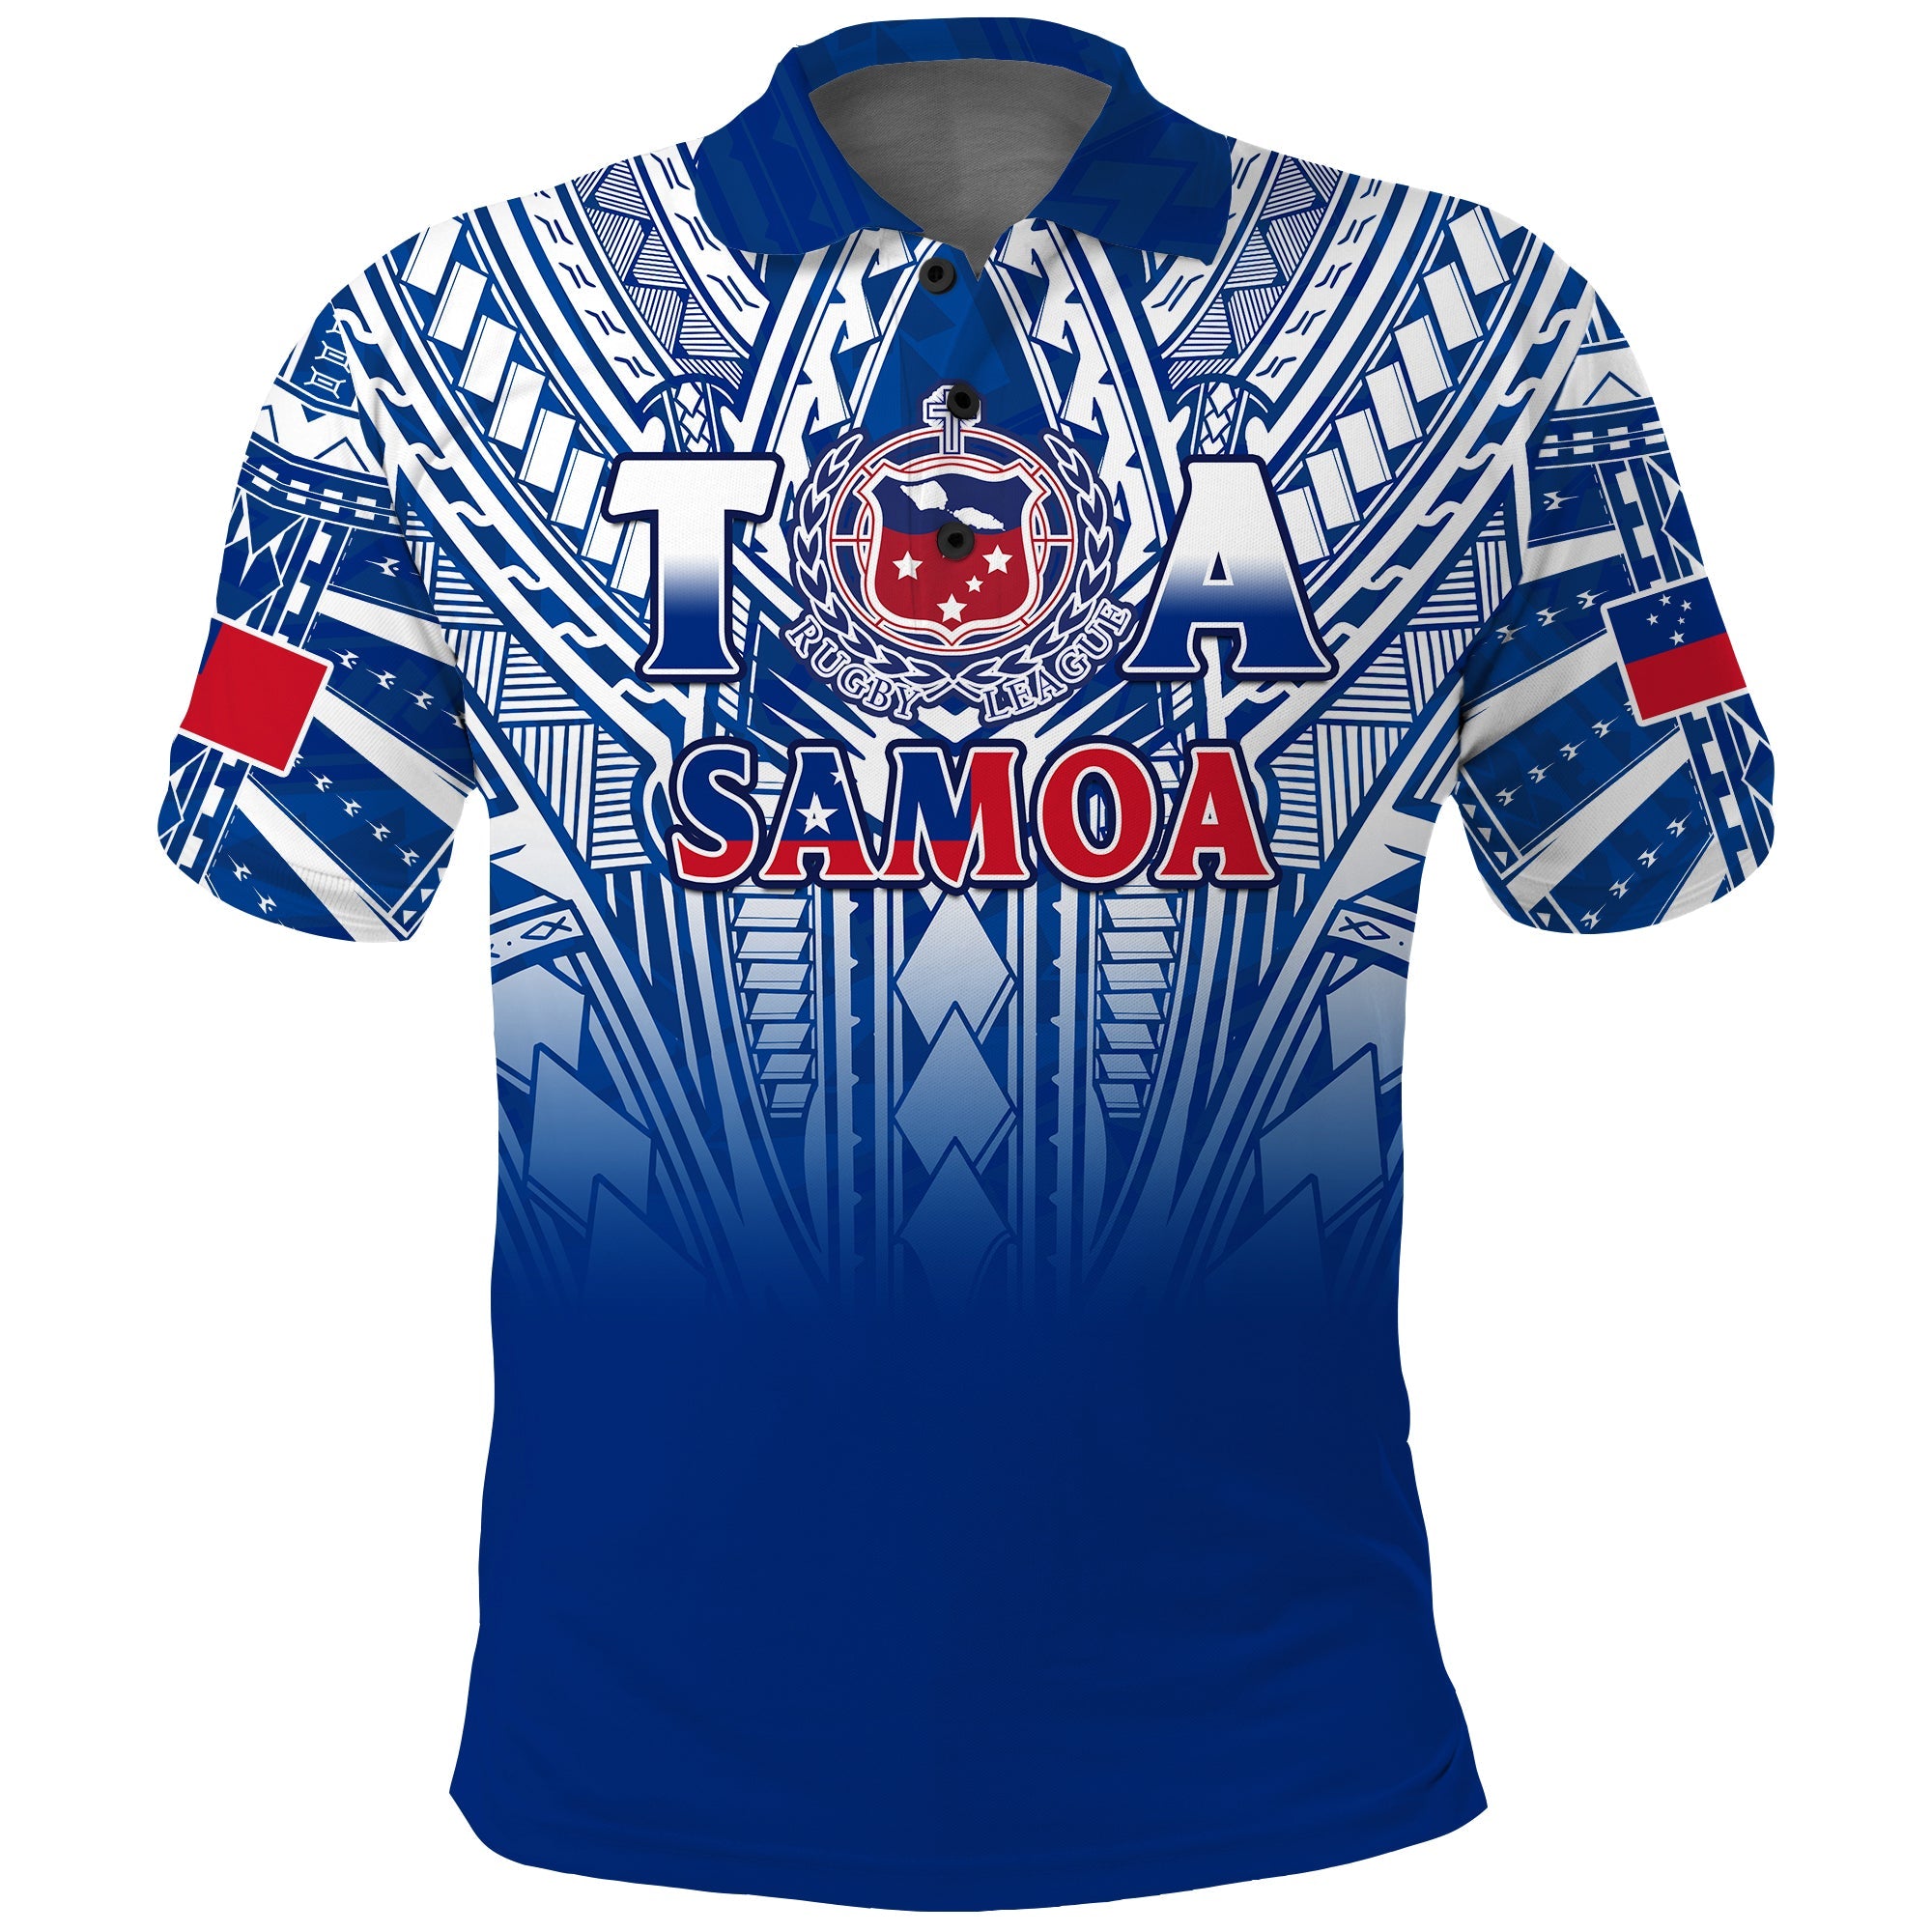 (Custom Text and Number) Samoa Rugby Polo Shirt Personalise Toa Samoa Polynesian Pacific Navy Version LT14 Blue - Polynesian Pride